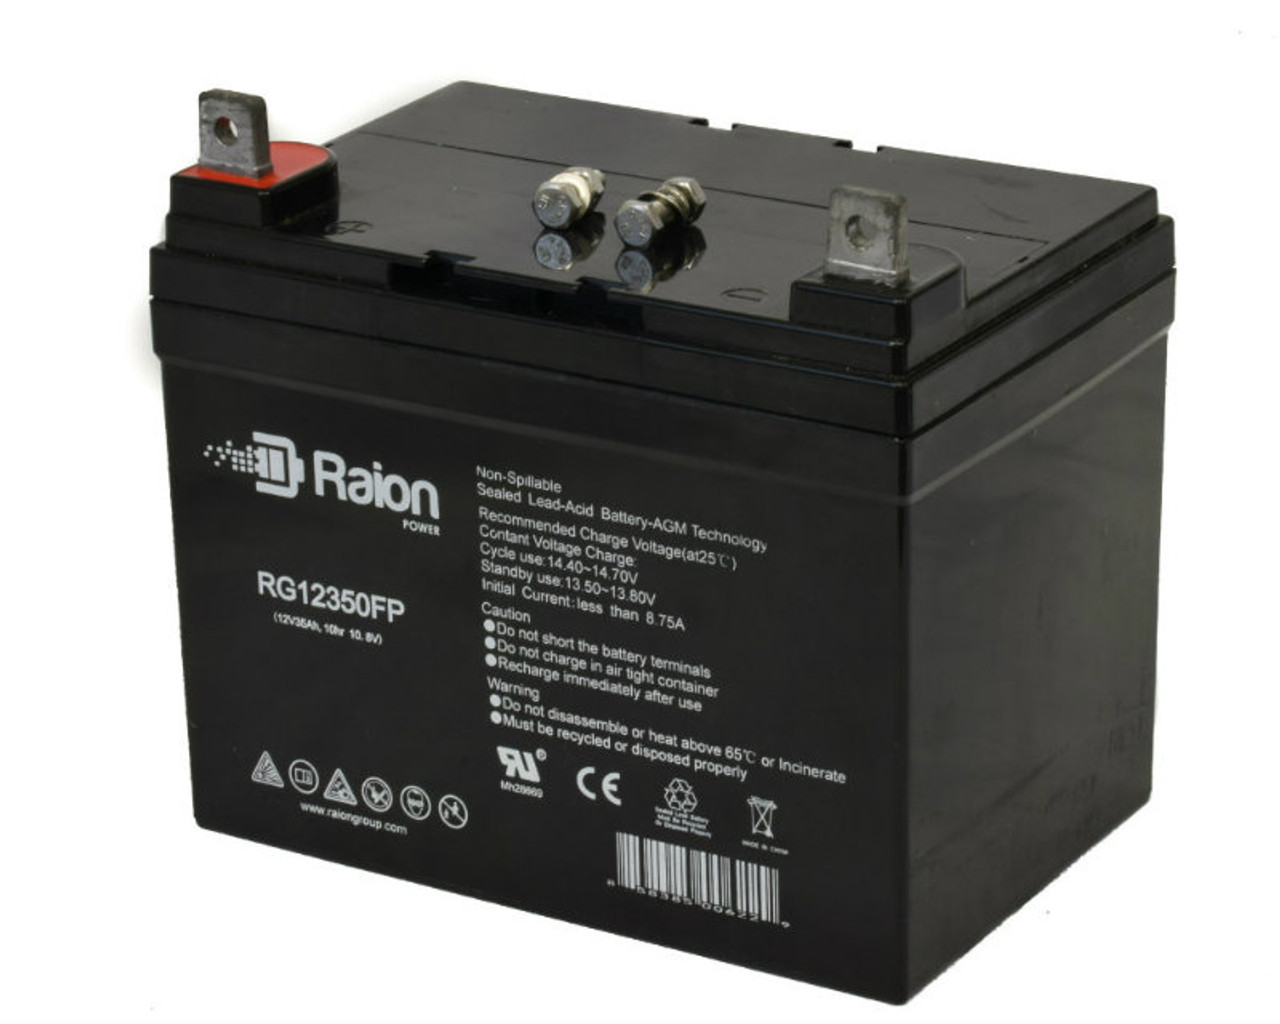 Raion Power Replacement 12V 35Ah Battery for Agco Allis 413H - 1 Pack